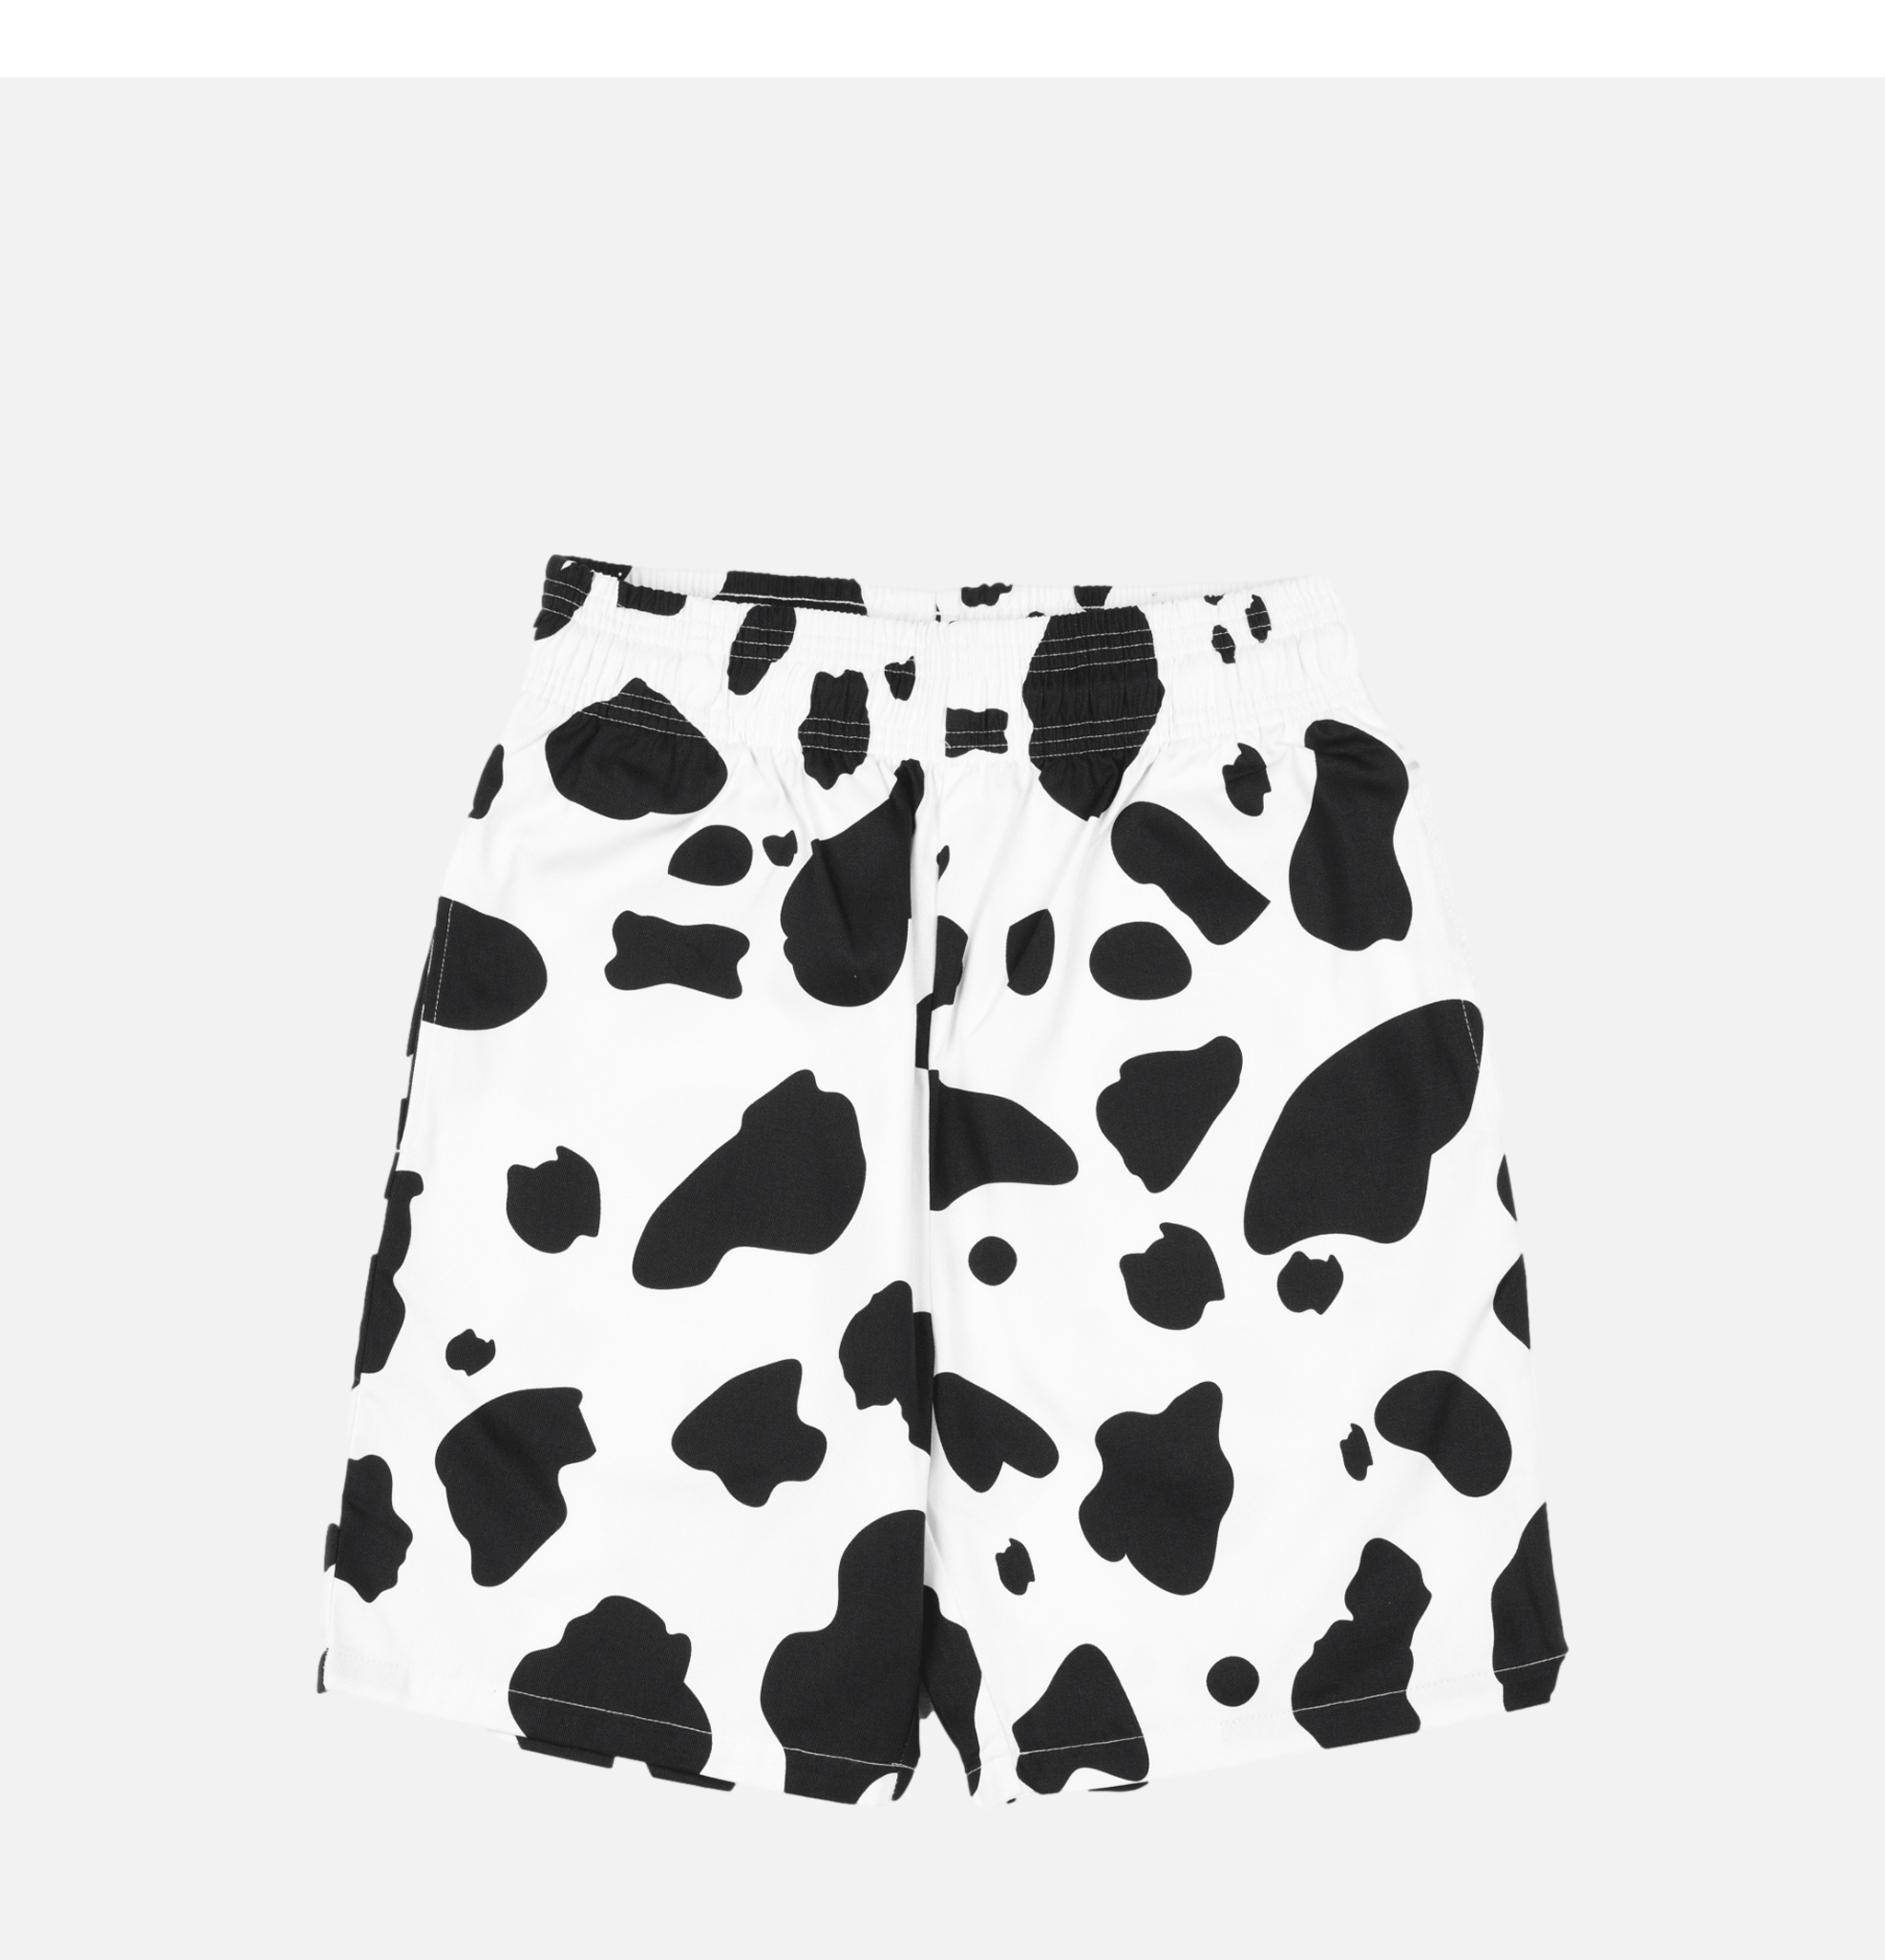 Chef Short Cow